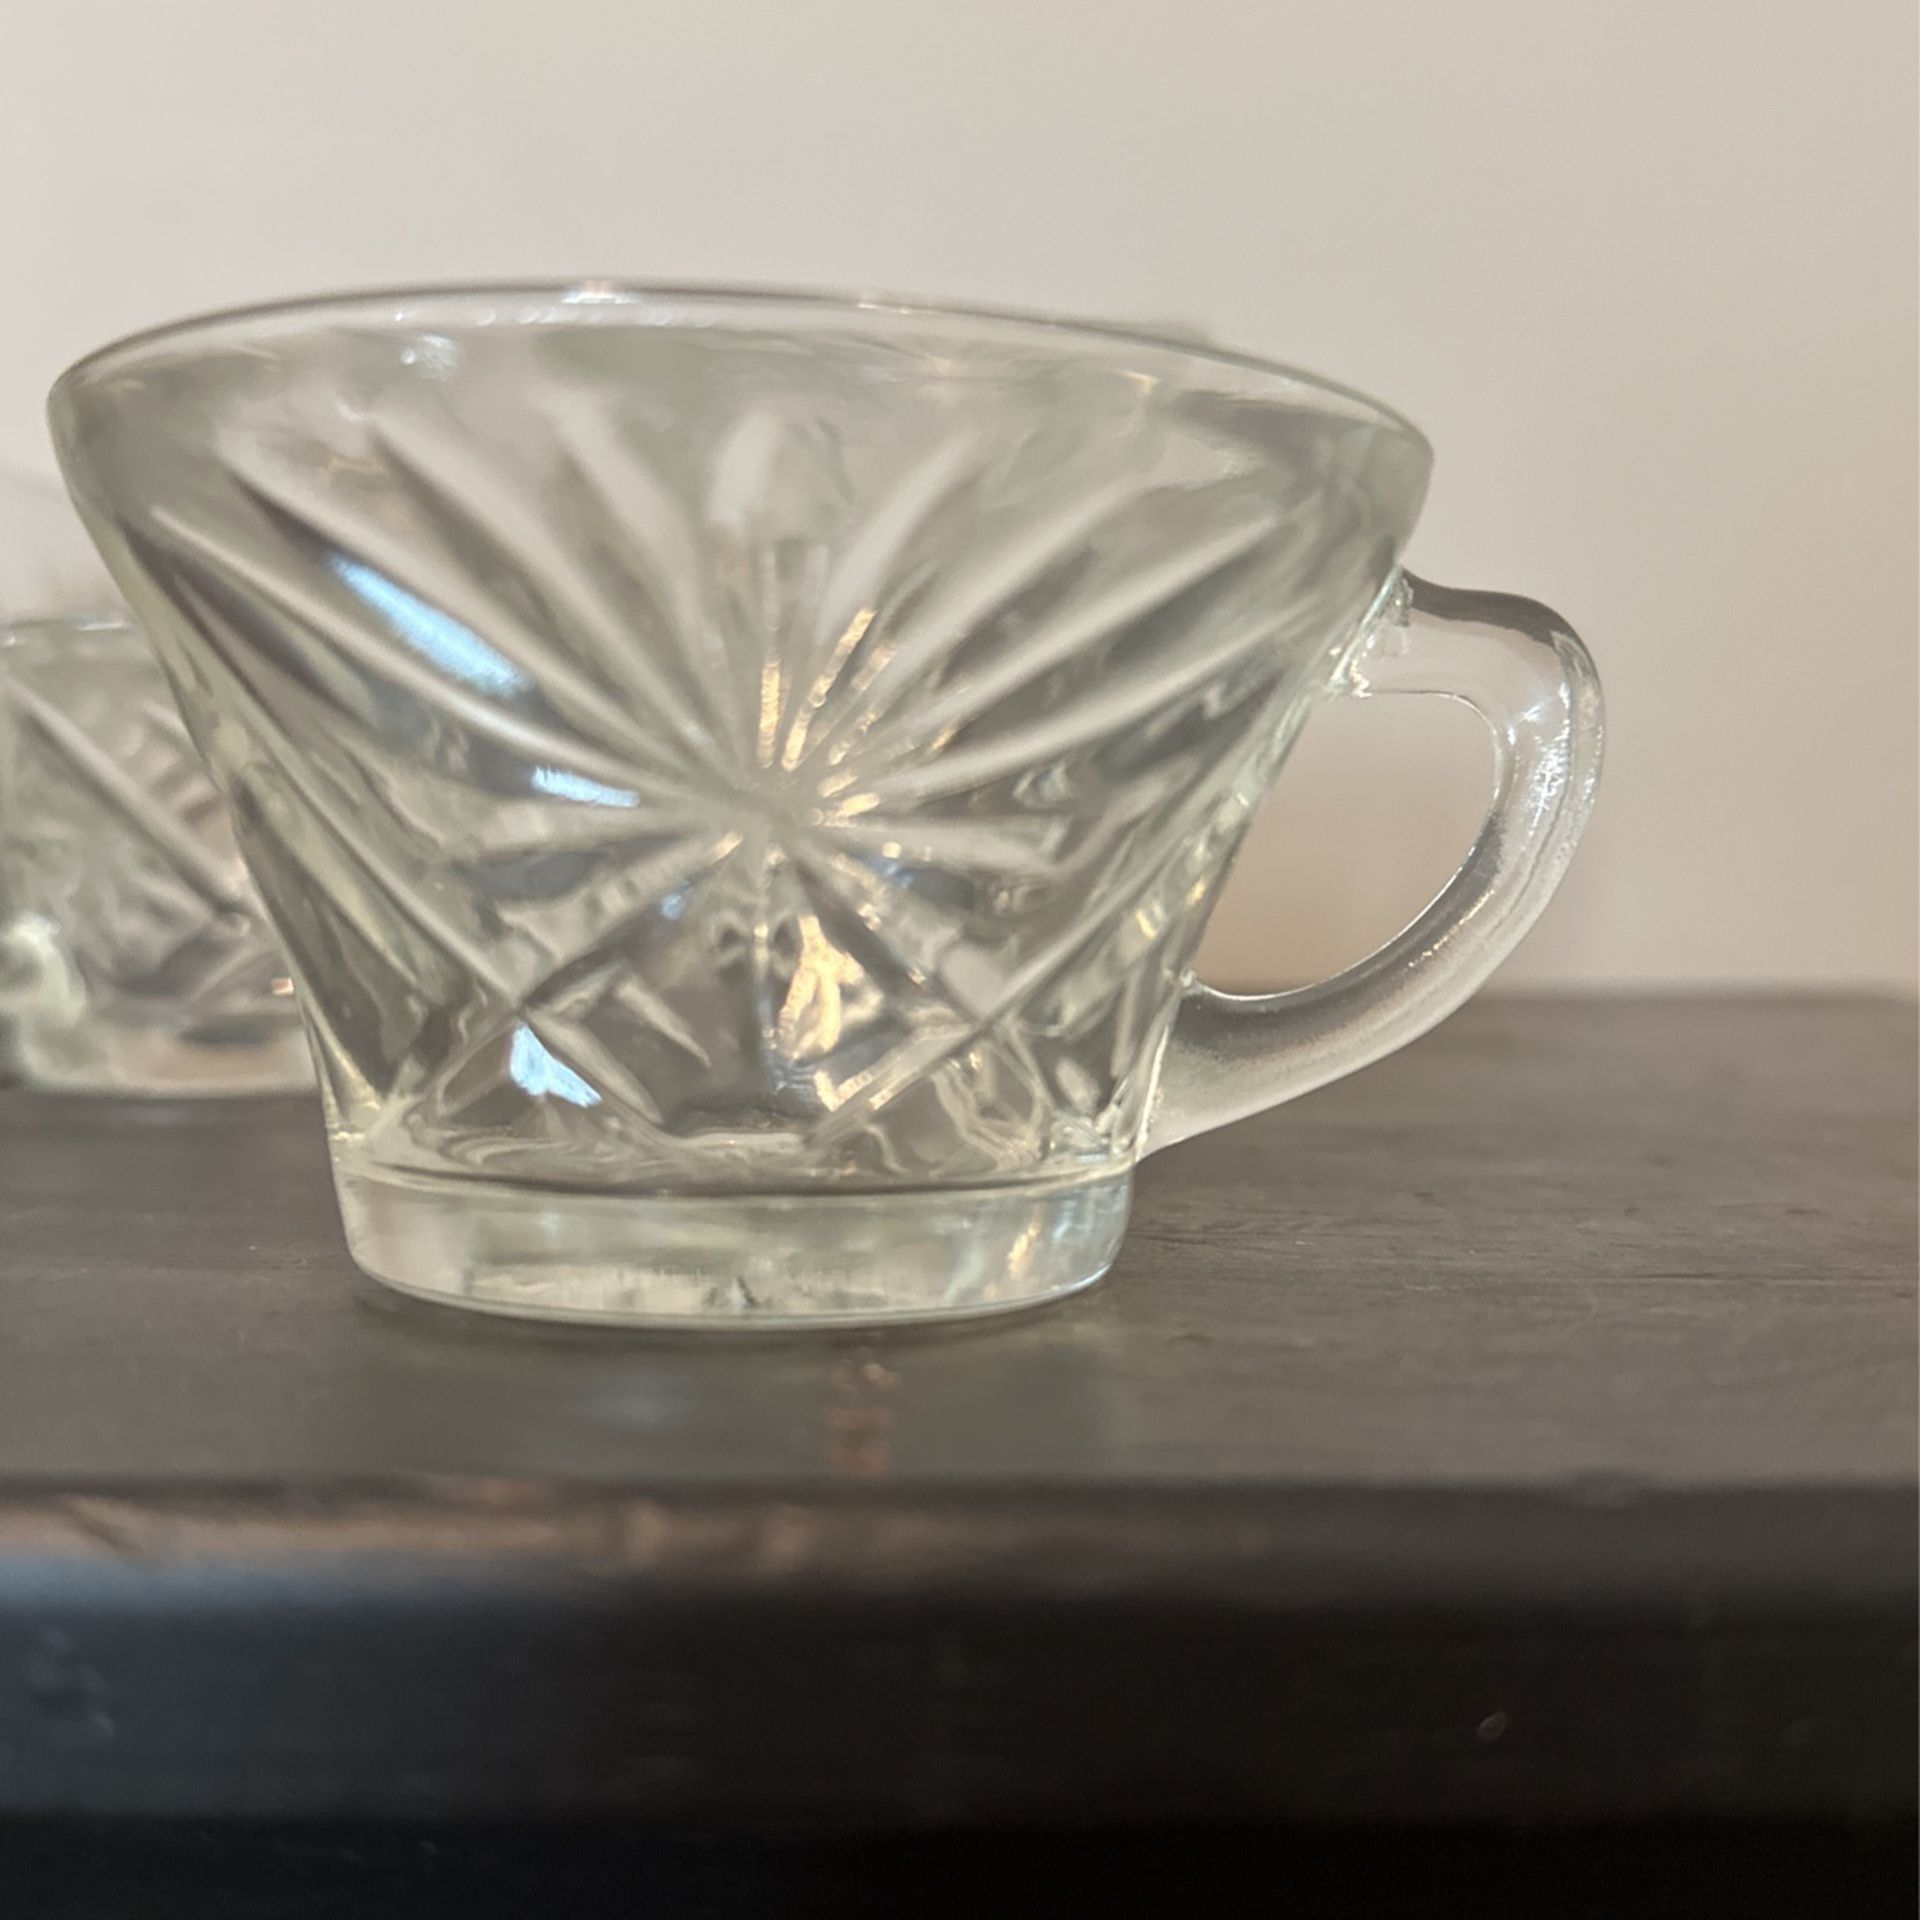 Vintage Punch Cups